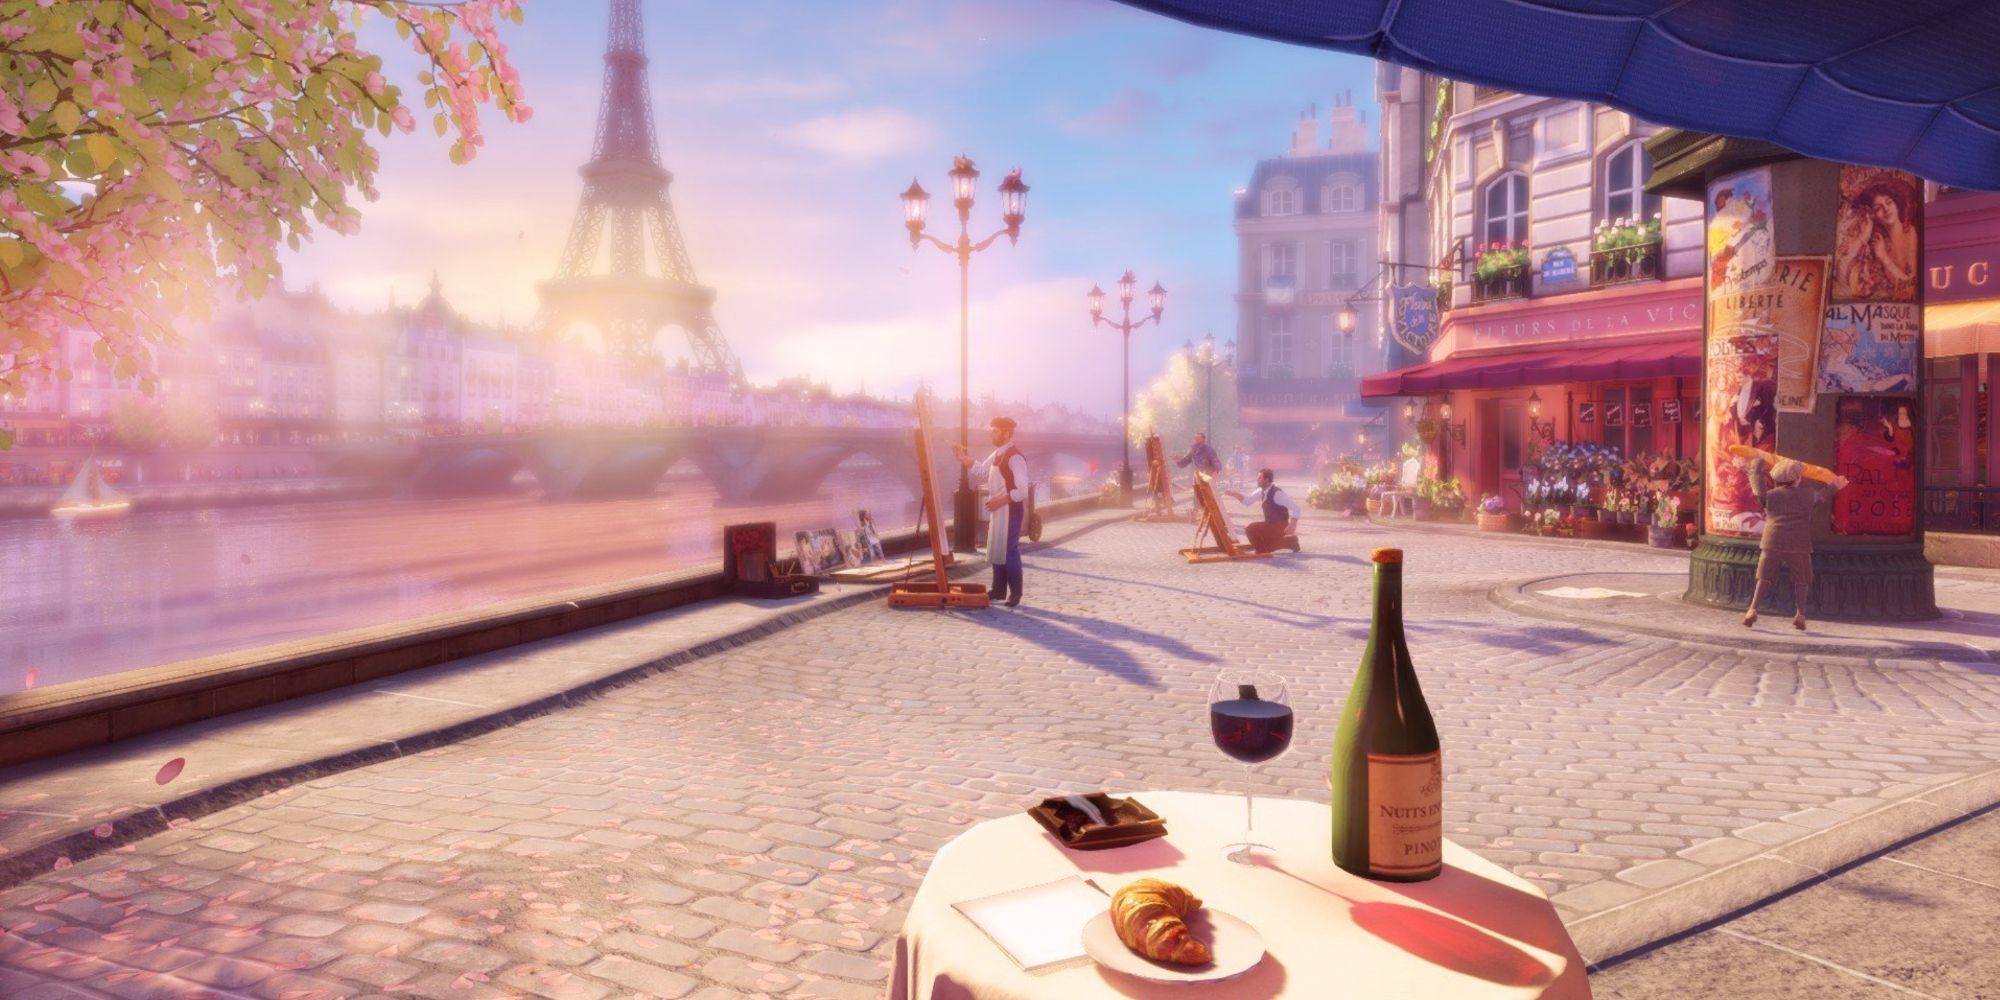 Picturesque views of the Eiffel Tower, the River Siene and artists painting in Paris in Bioshock Infinite Burial At Sea DLC